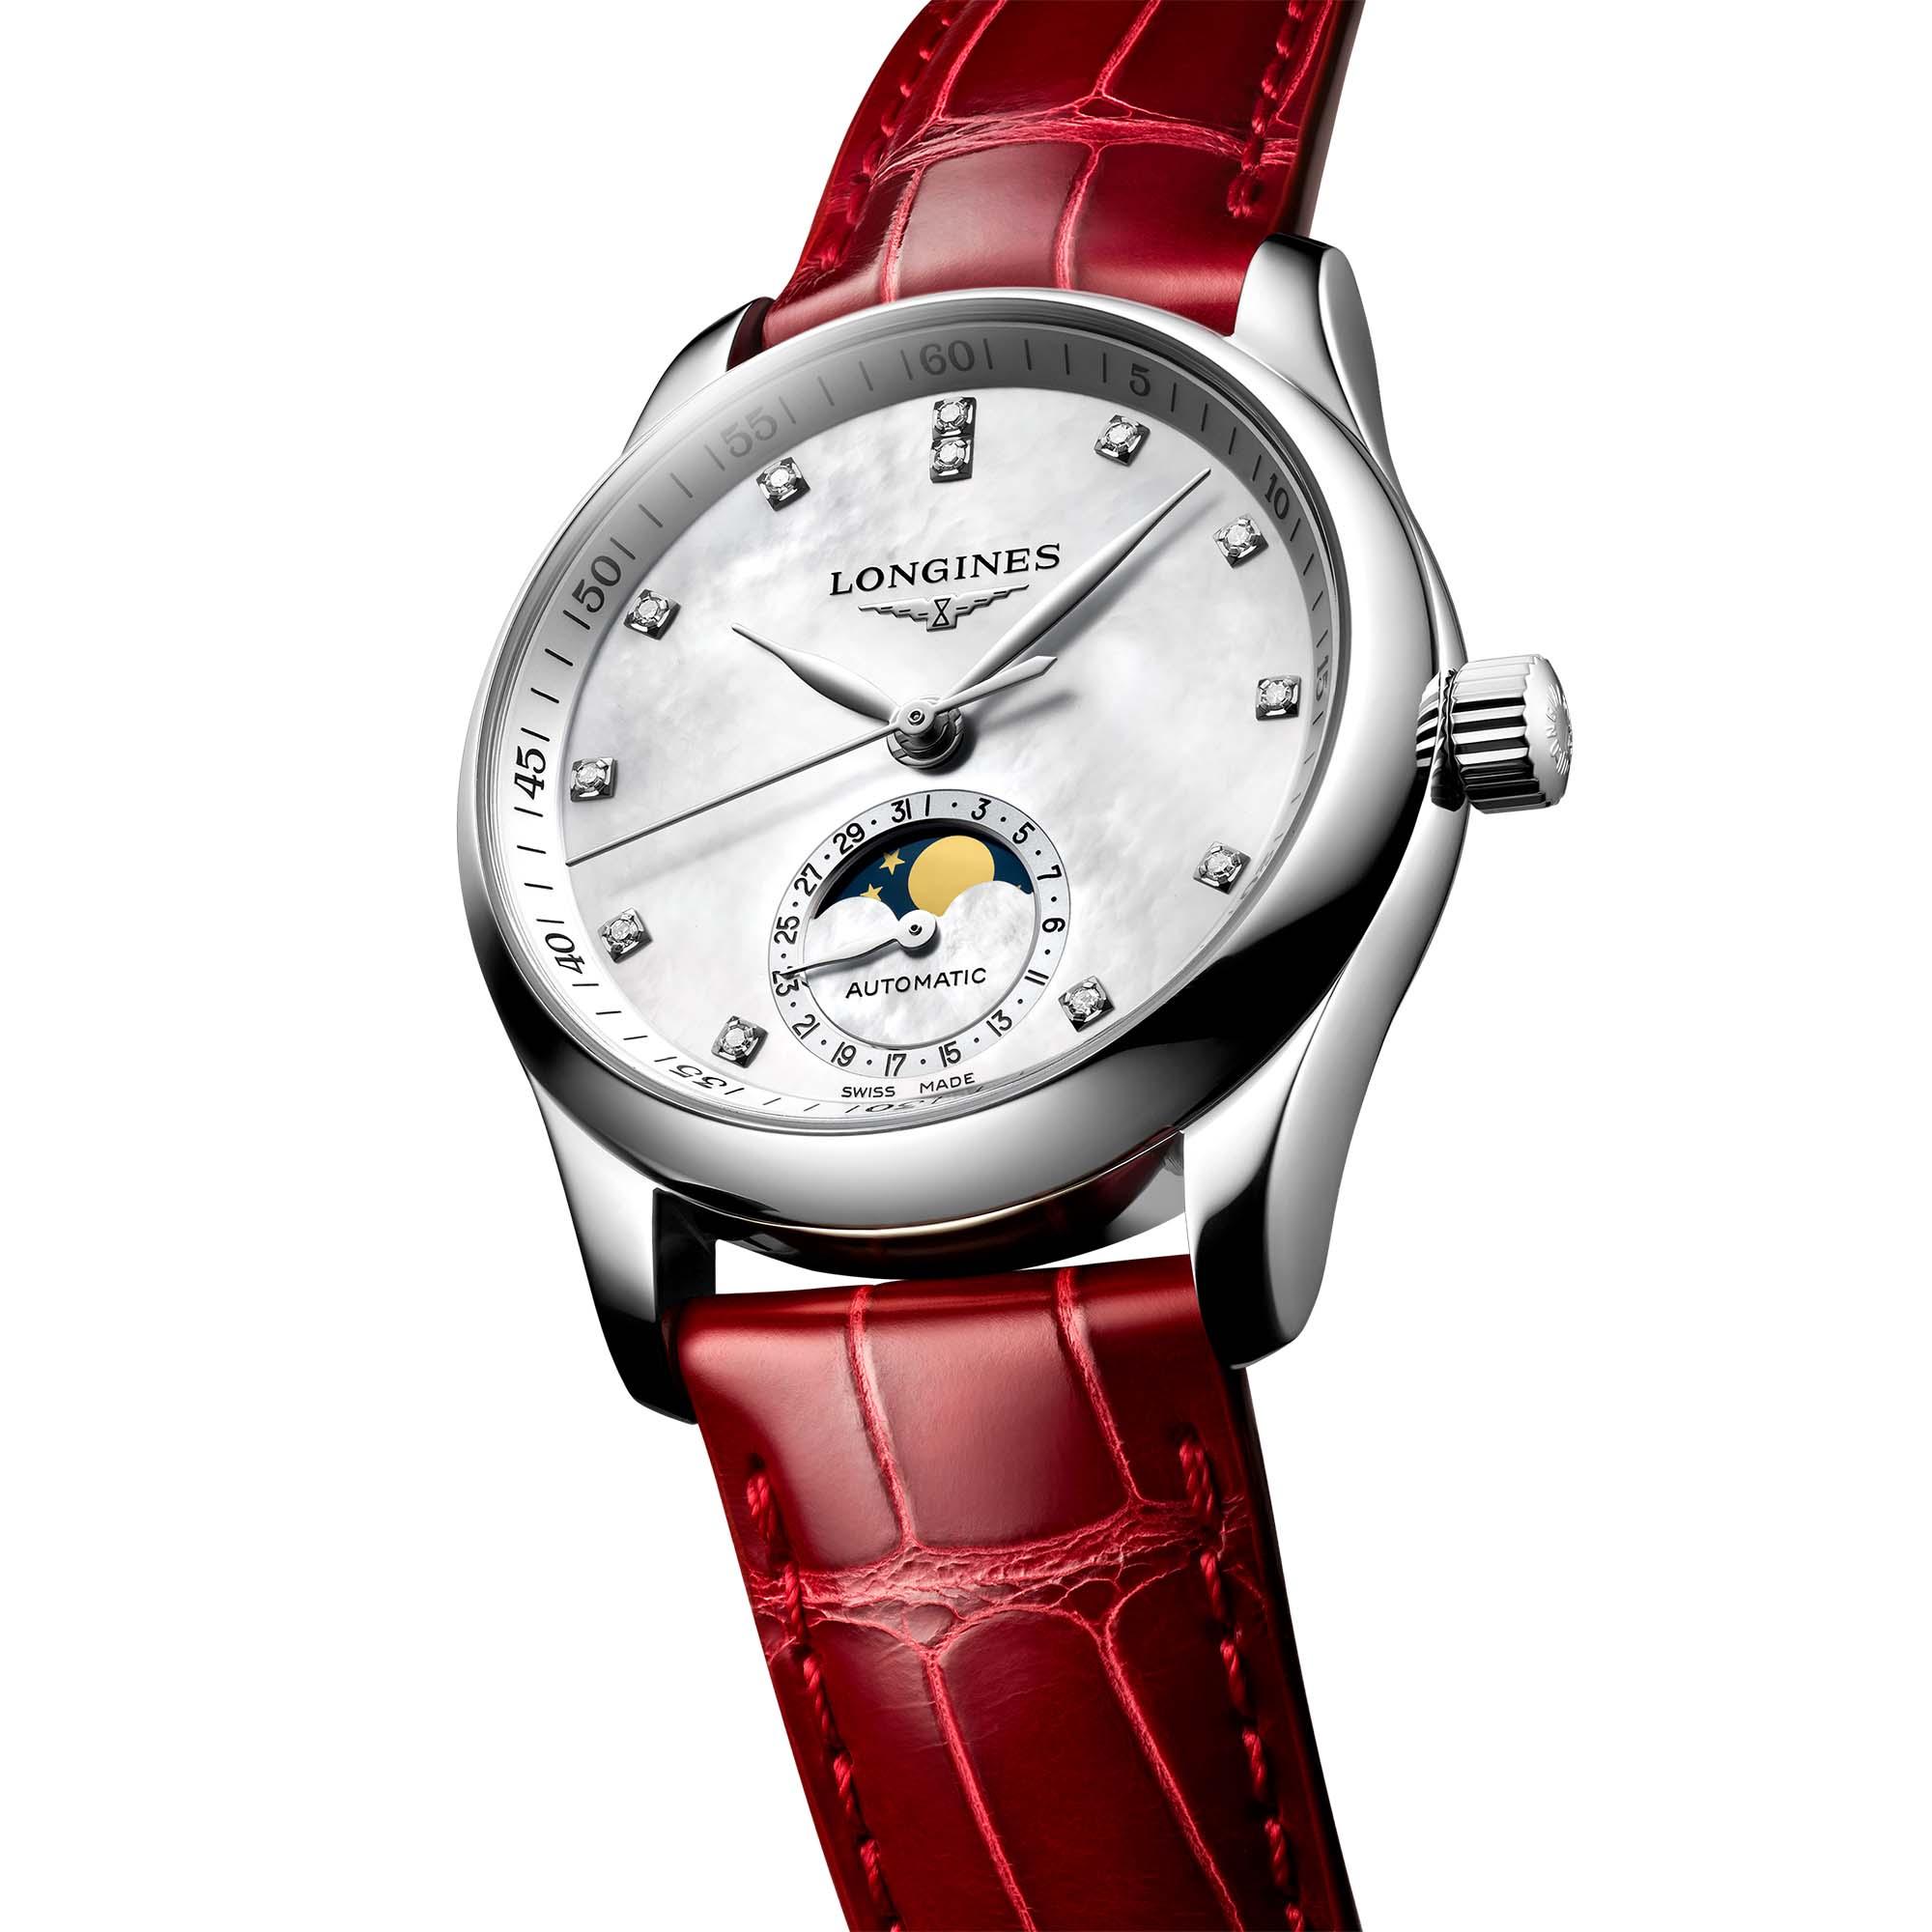 Longines The Longines Master Collection (Ref: L2.409.4.87.2)